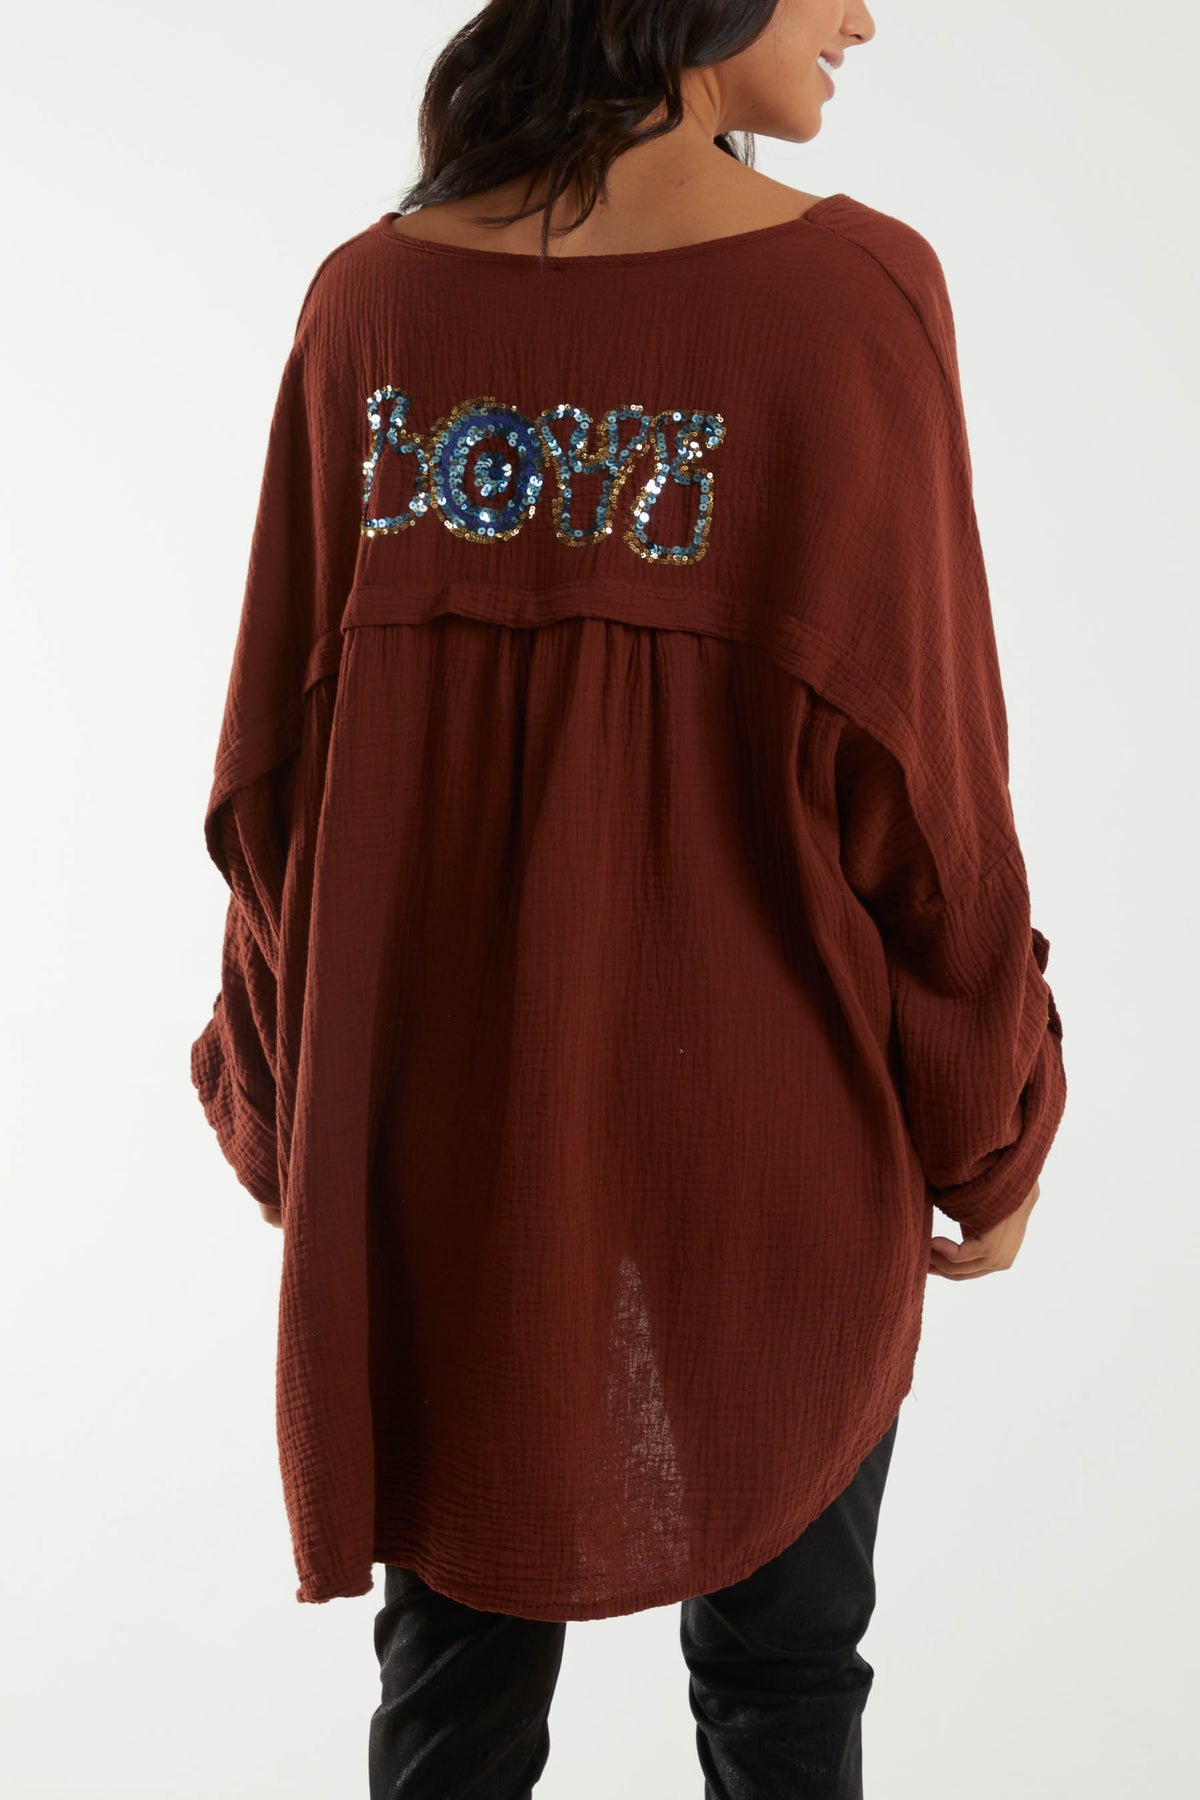 Oversized Cheesecloth Sequin "Love" Blouse